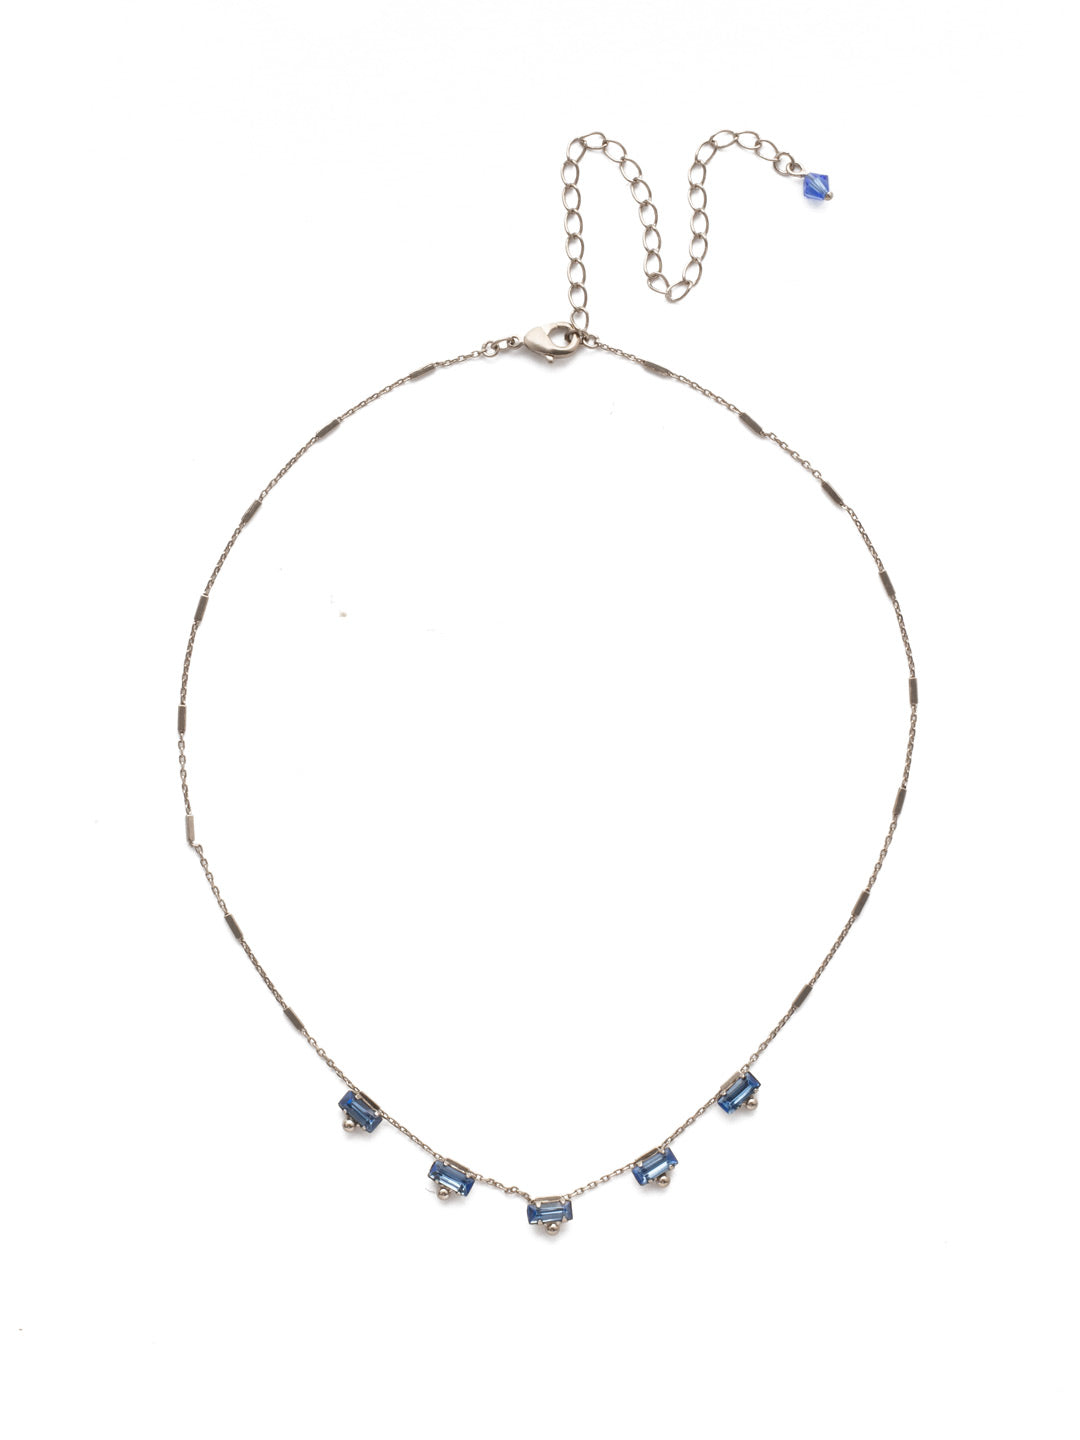 Shine and Dash Tennis Necklace - NDM17ASOCR - Beautifully faceted baguette crystals set in rectangular row offer simple styling that will add a pop of sparkle to your look. From Sorrelli's Orange Crush collection in our Antique Silver-tone finish.